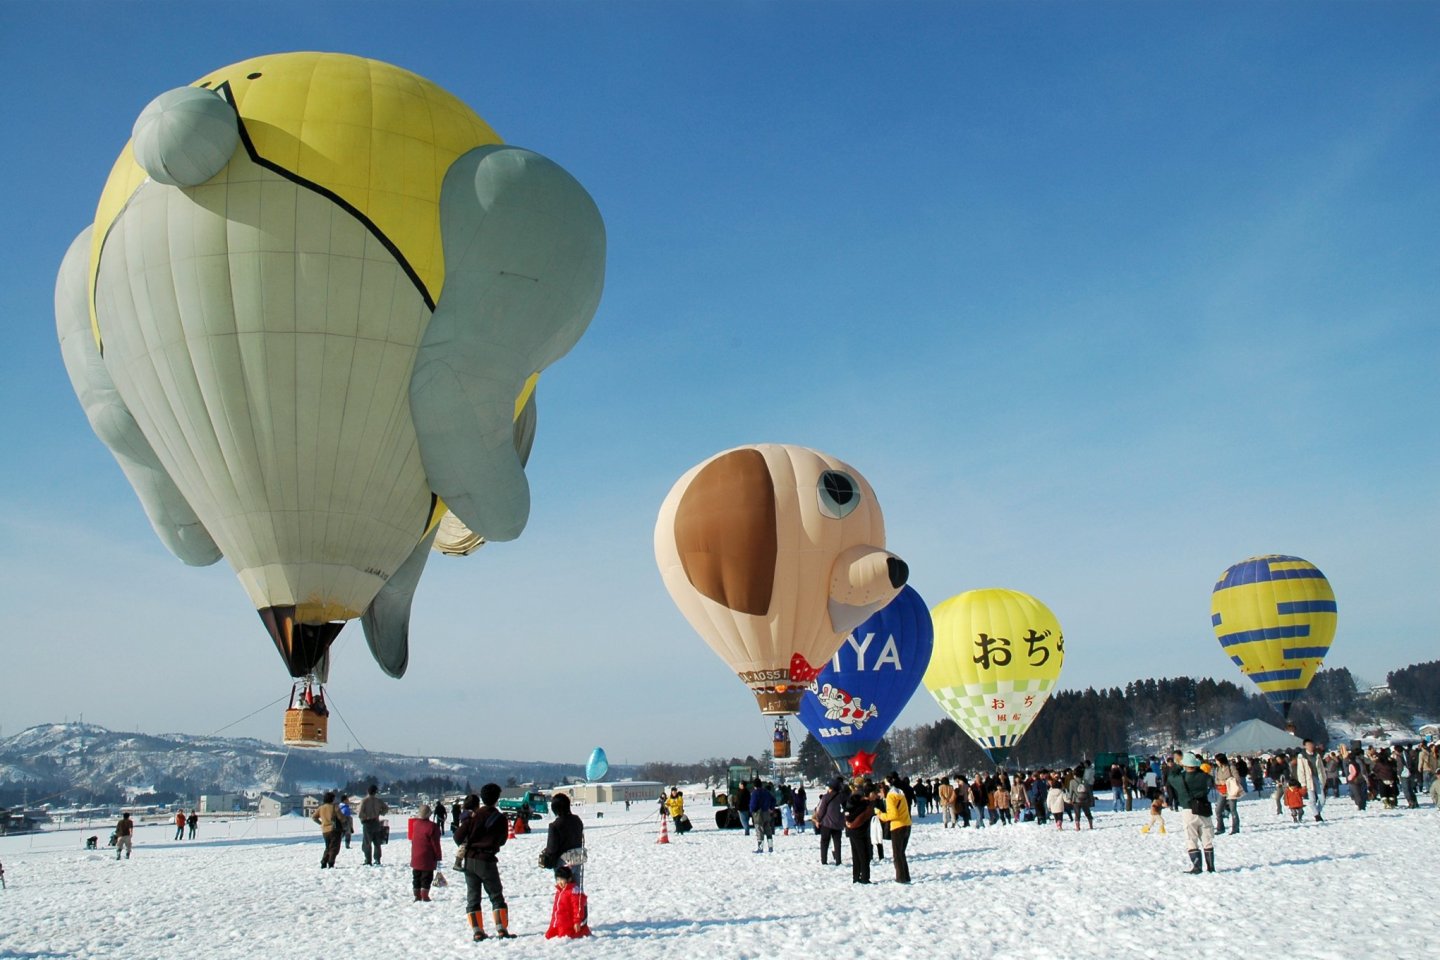 The snowy white landscape is filled with brightly colored balloons